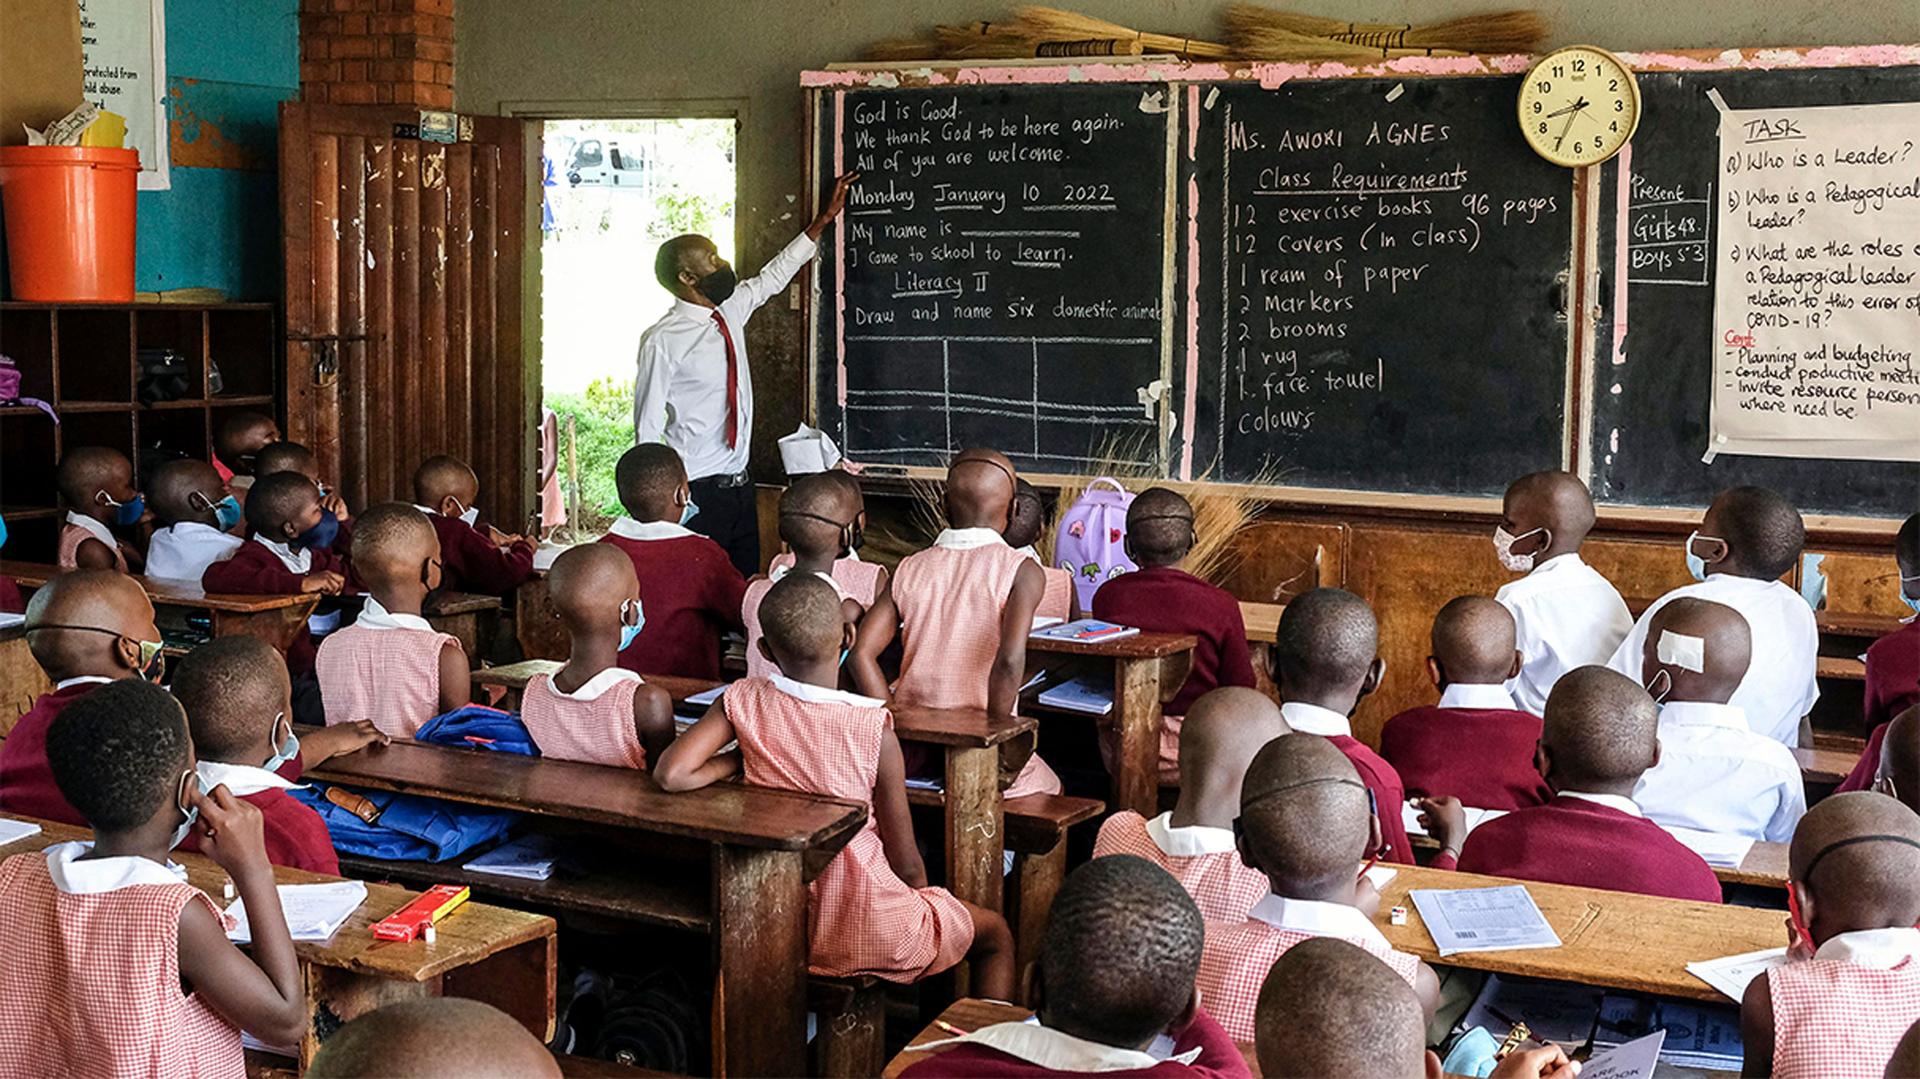 Pupils wear face masks as they attend class at Kitante Primary School in Kampala, Uganda